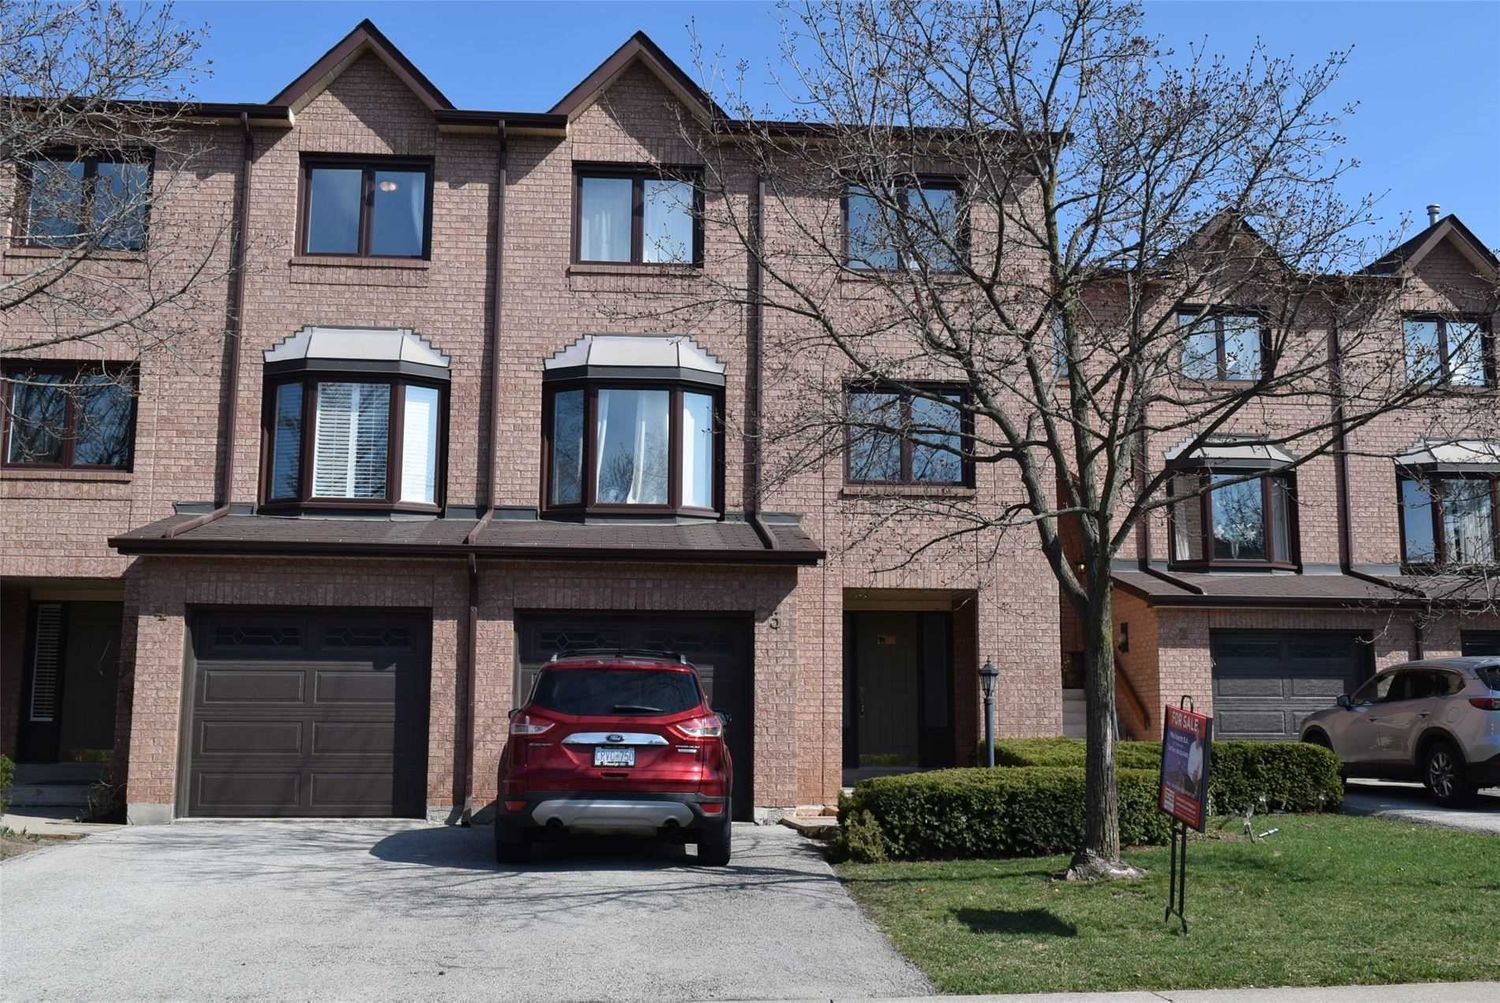 1100 Queens Avenue. 1100 Queens Avenue Townhomes is located in  Oakville, Toronto - image #1 of 2